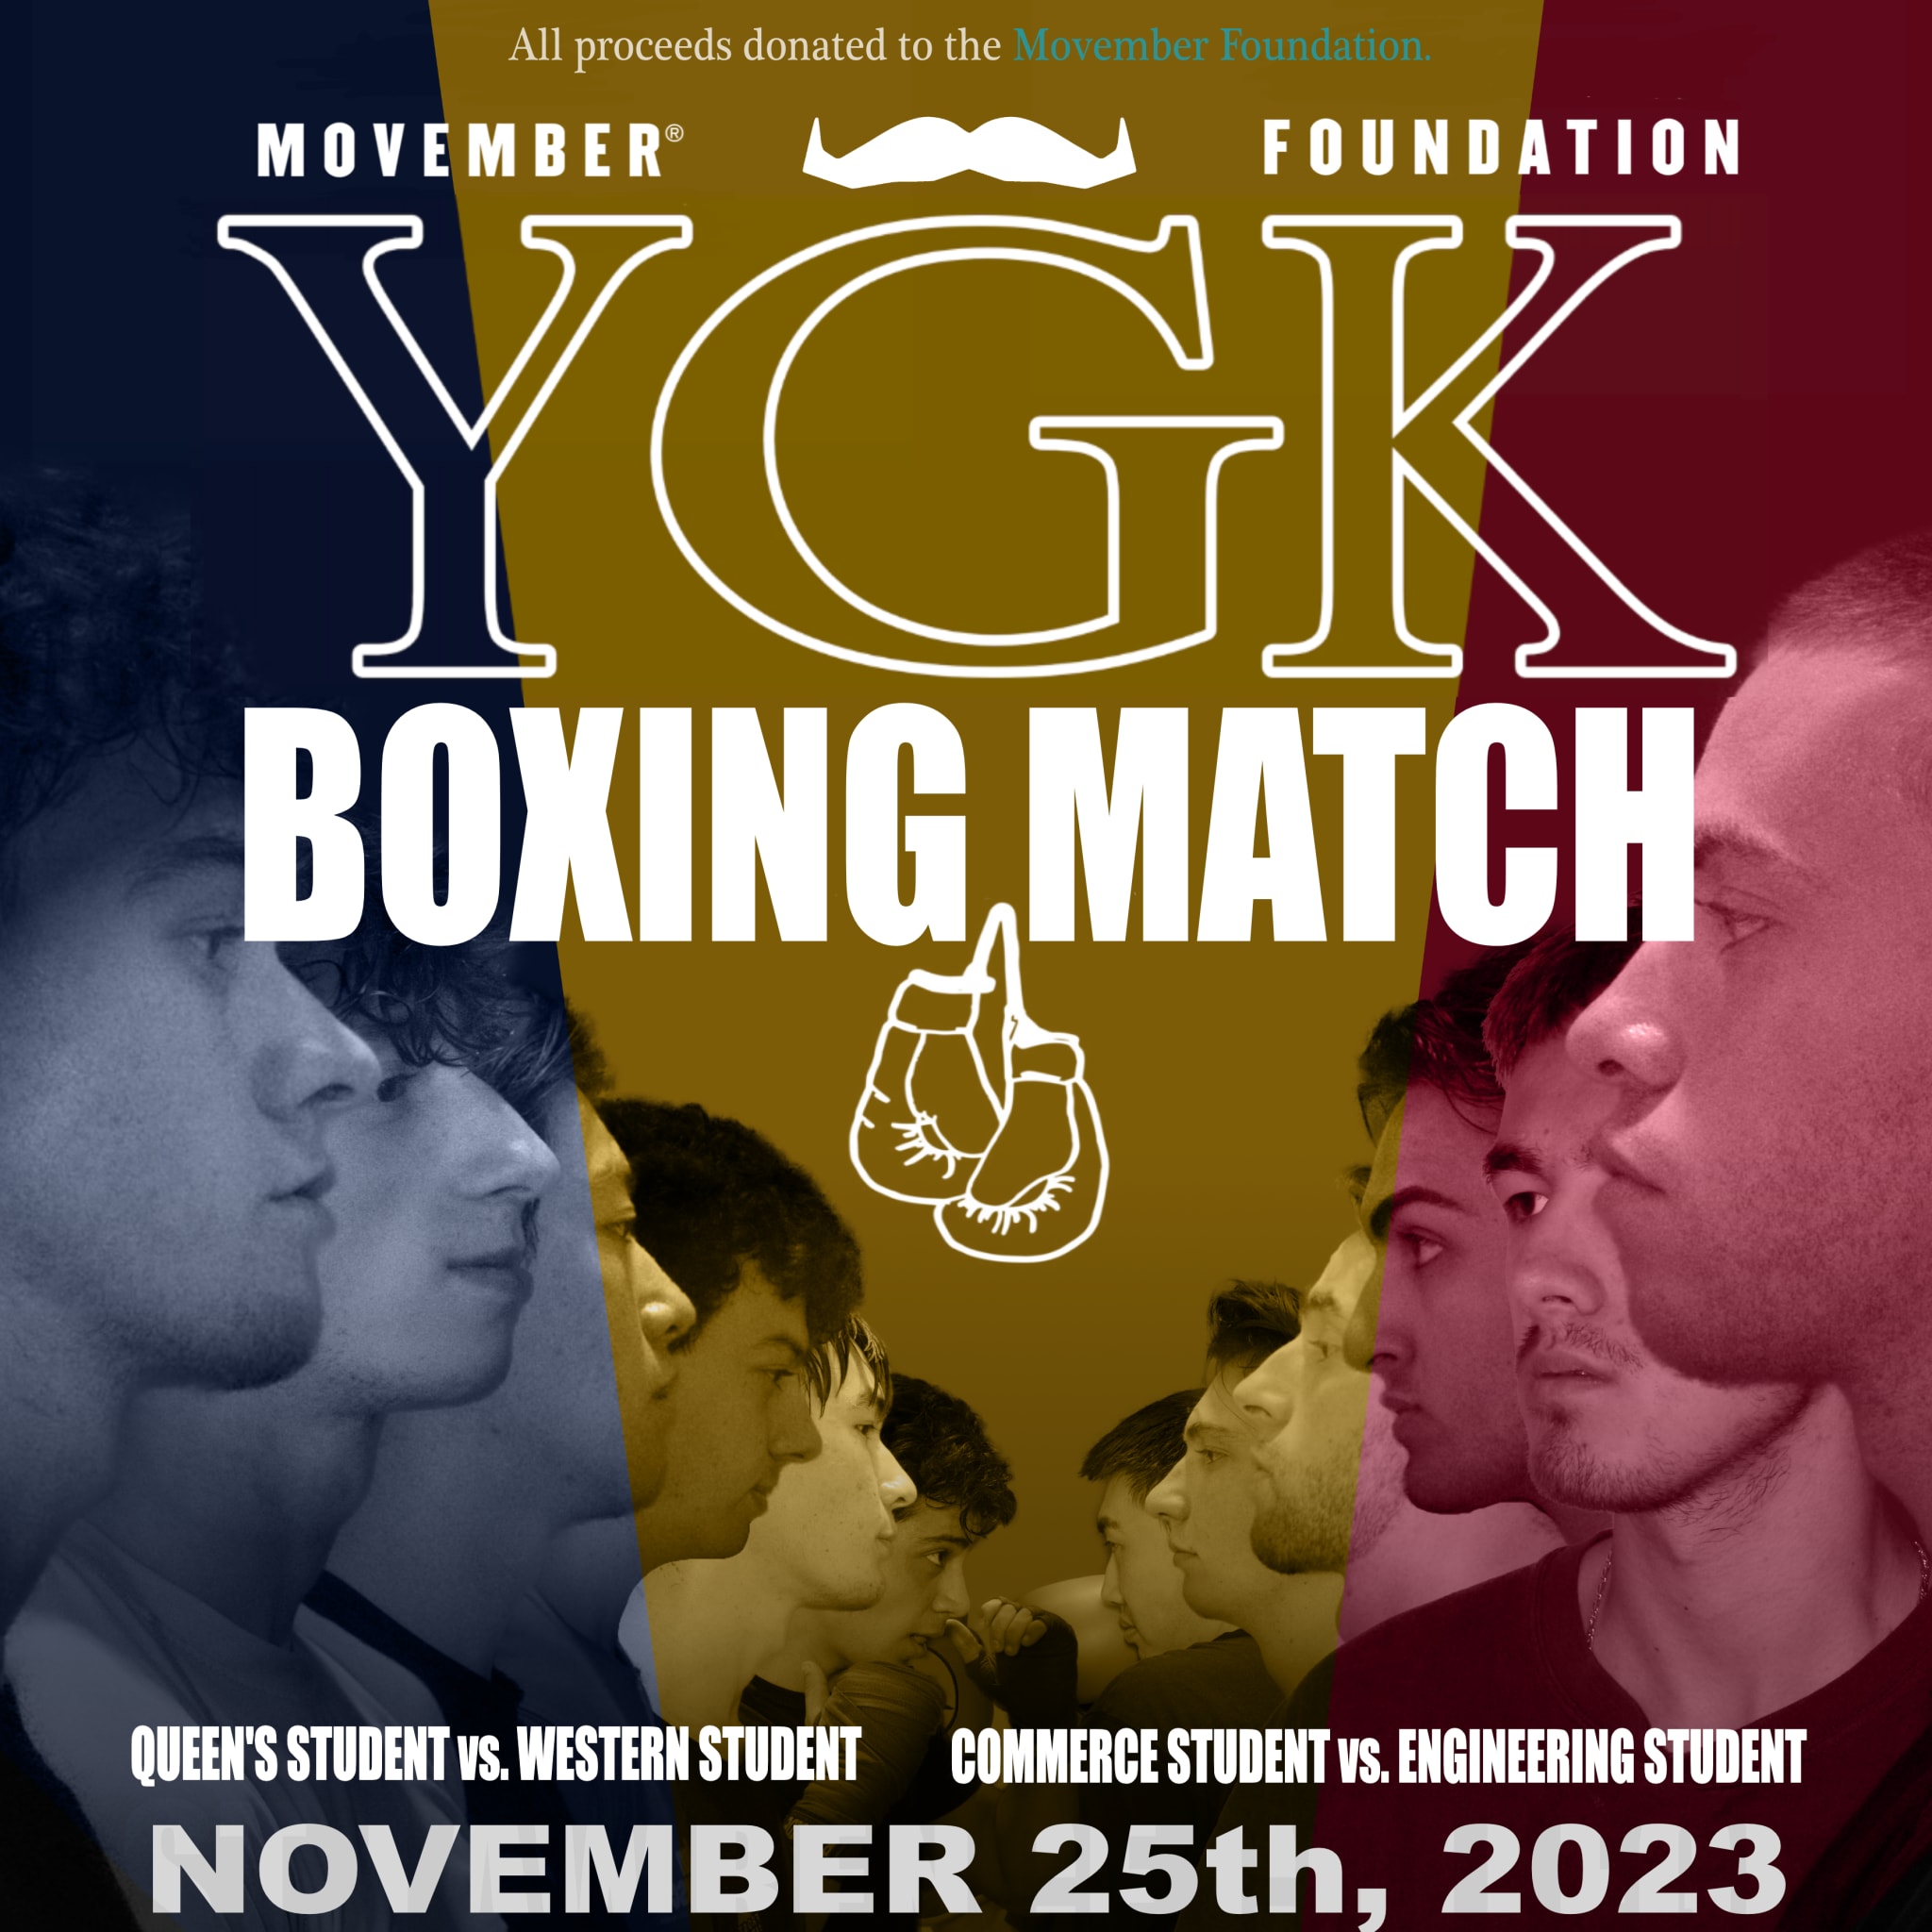 YGK Charity Boxing Match